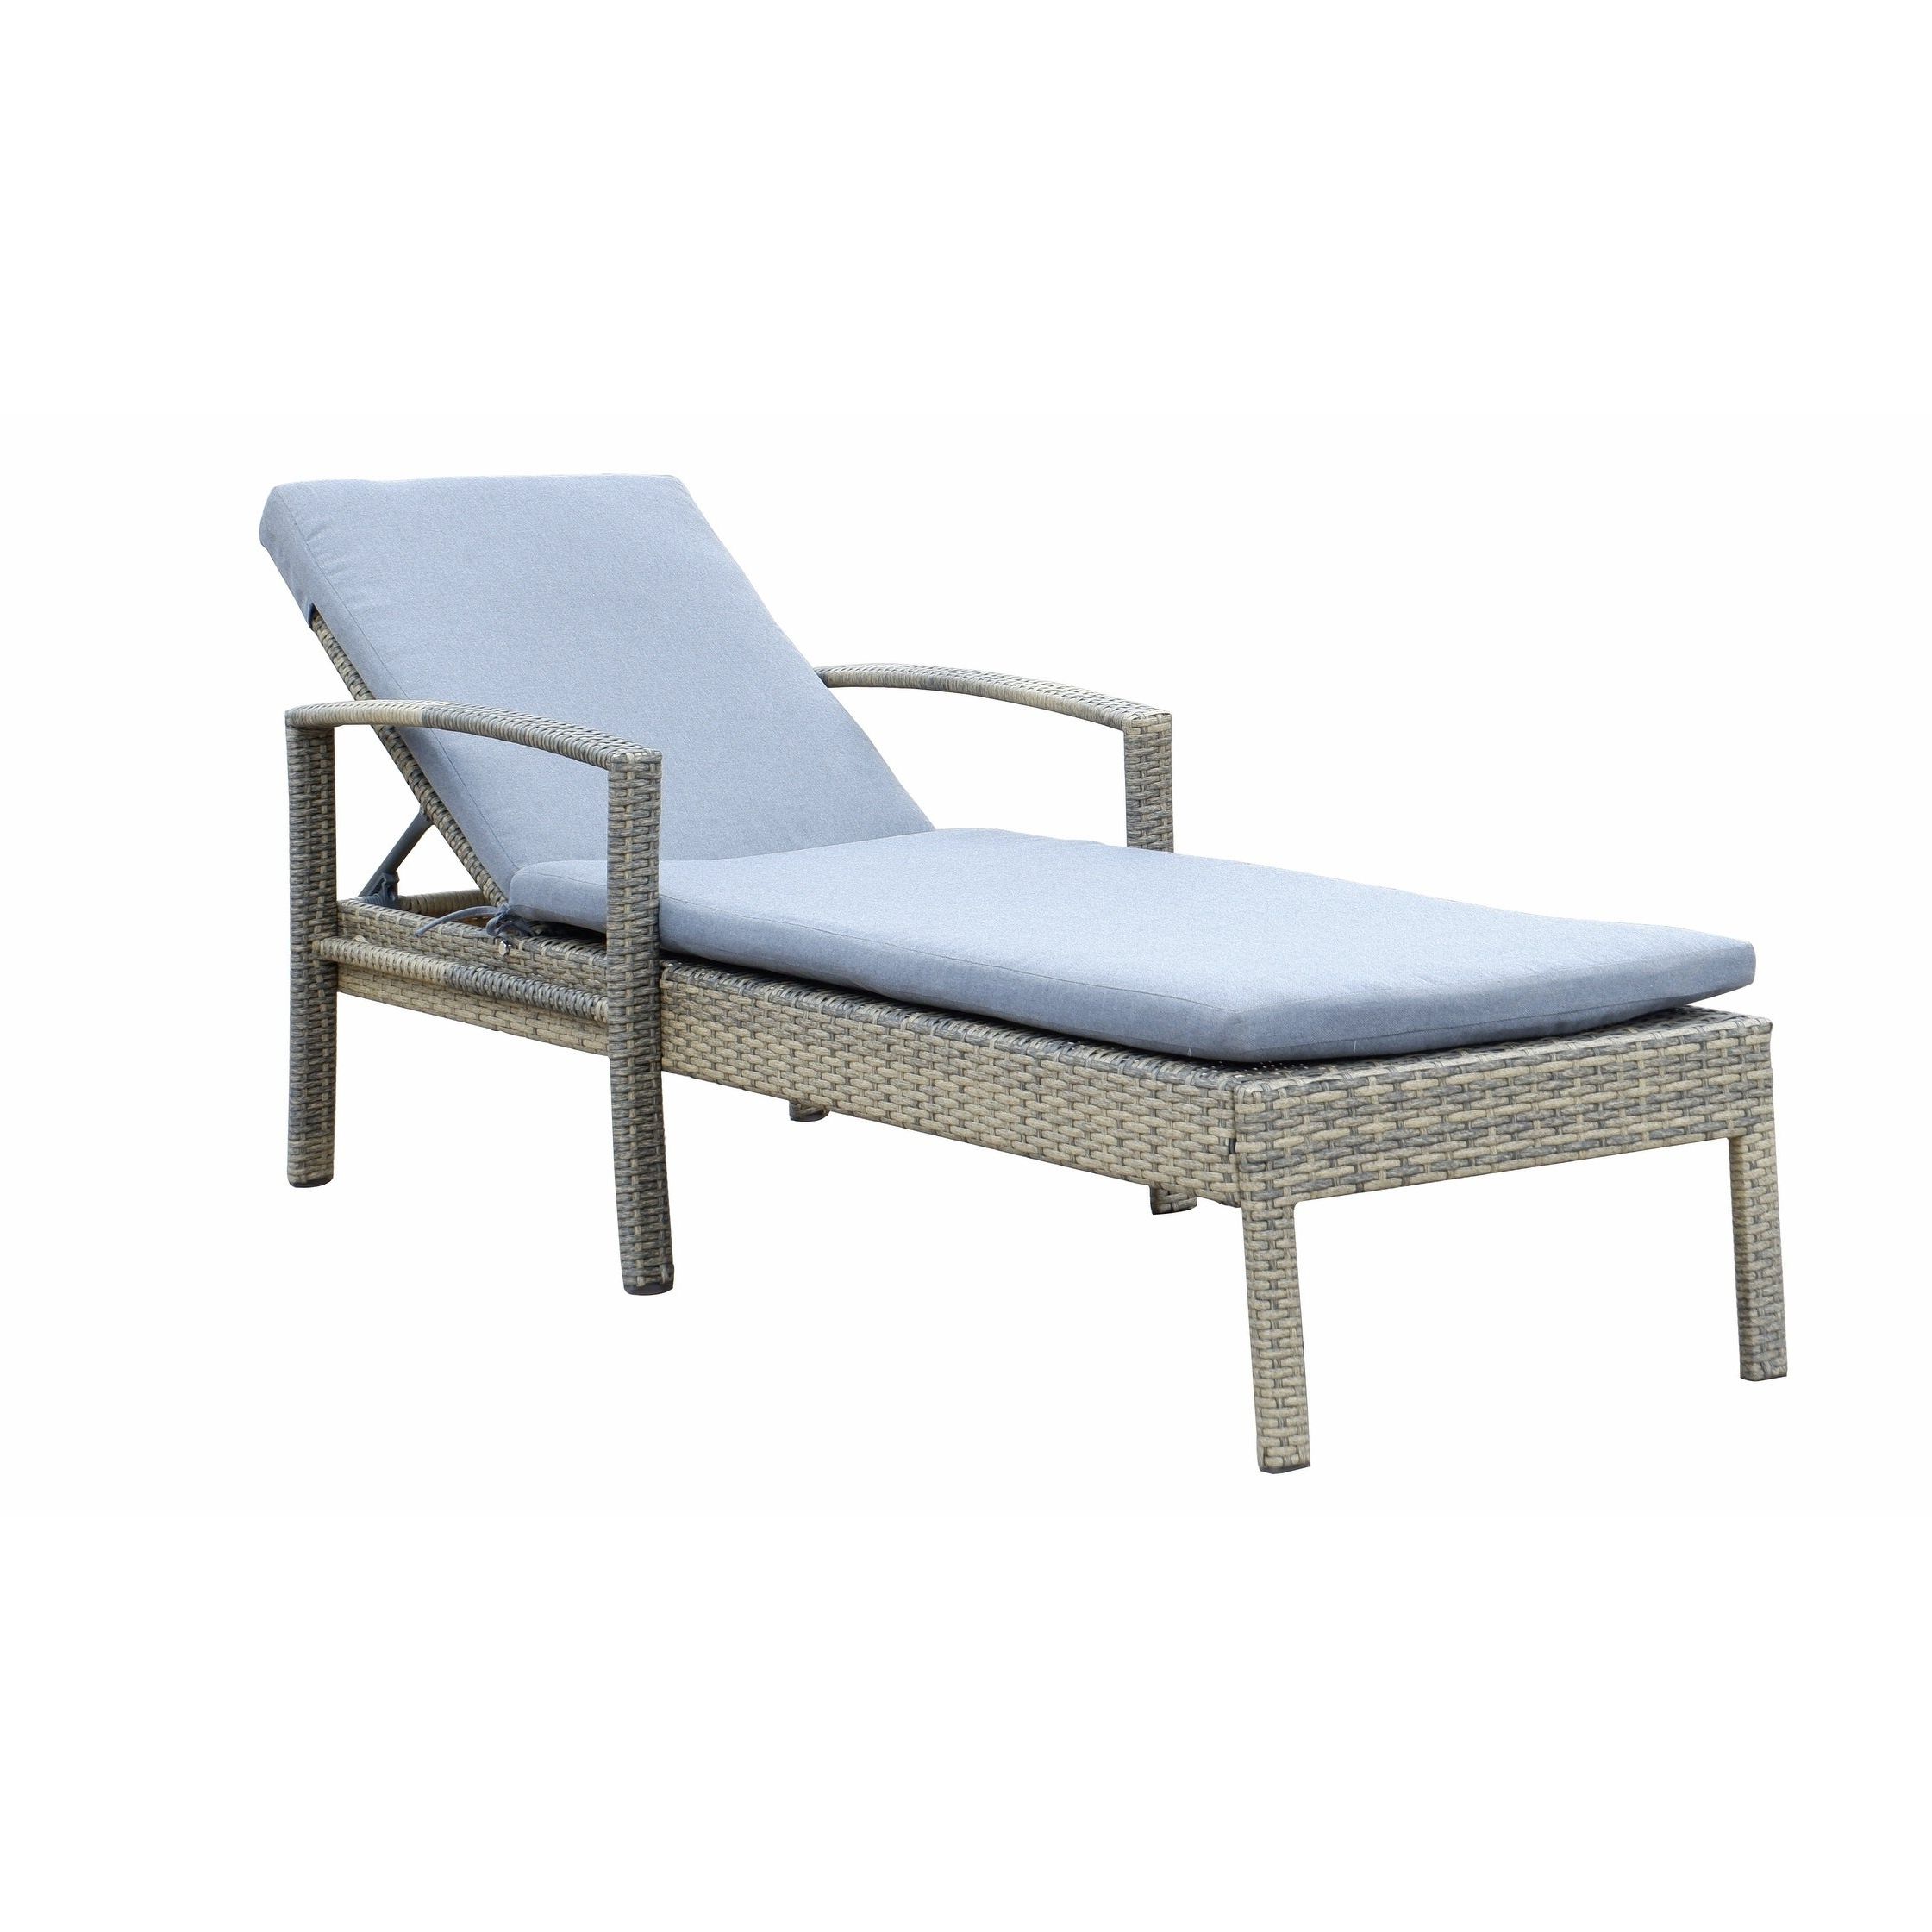 Cosco Outdoor Steel Woven Wicker Chaise Lounge Chairs Throughout Current Newport Chaise Lounge With Cushion (View 16 of 25)